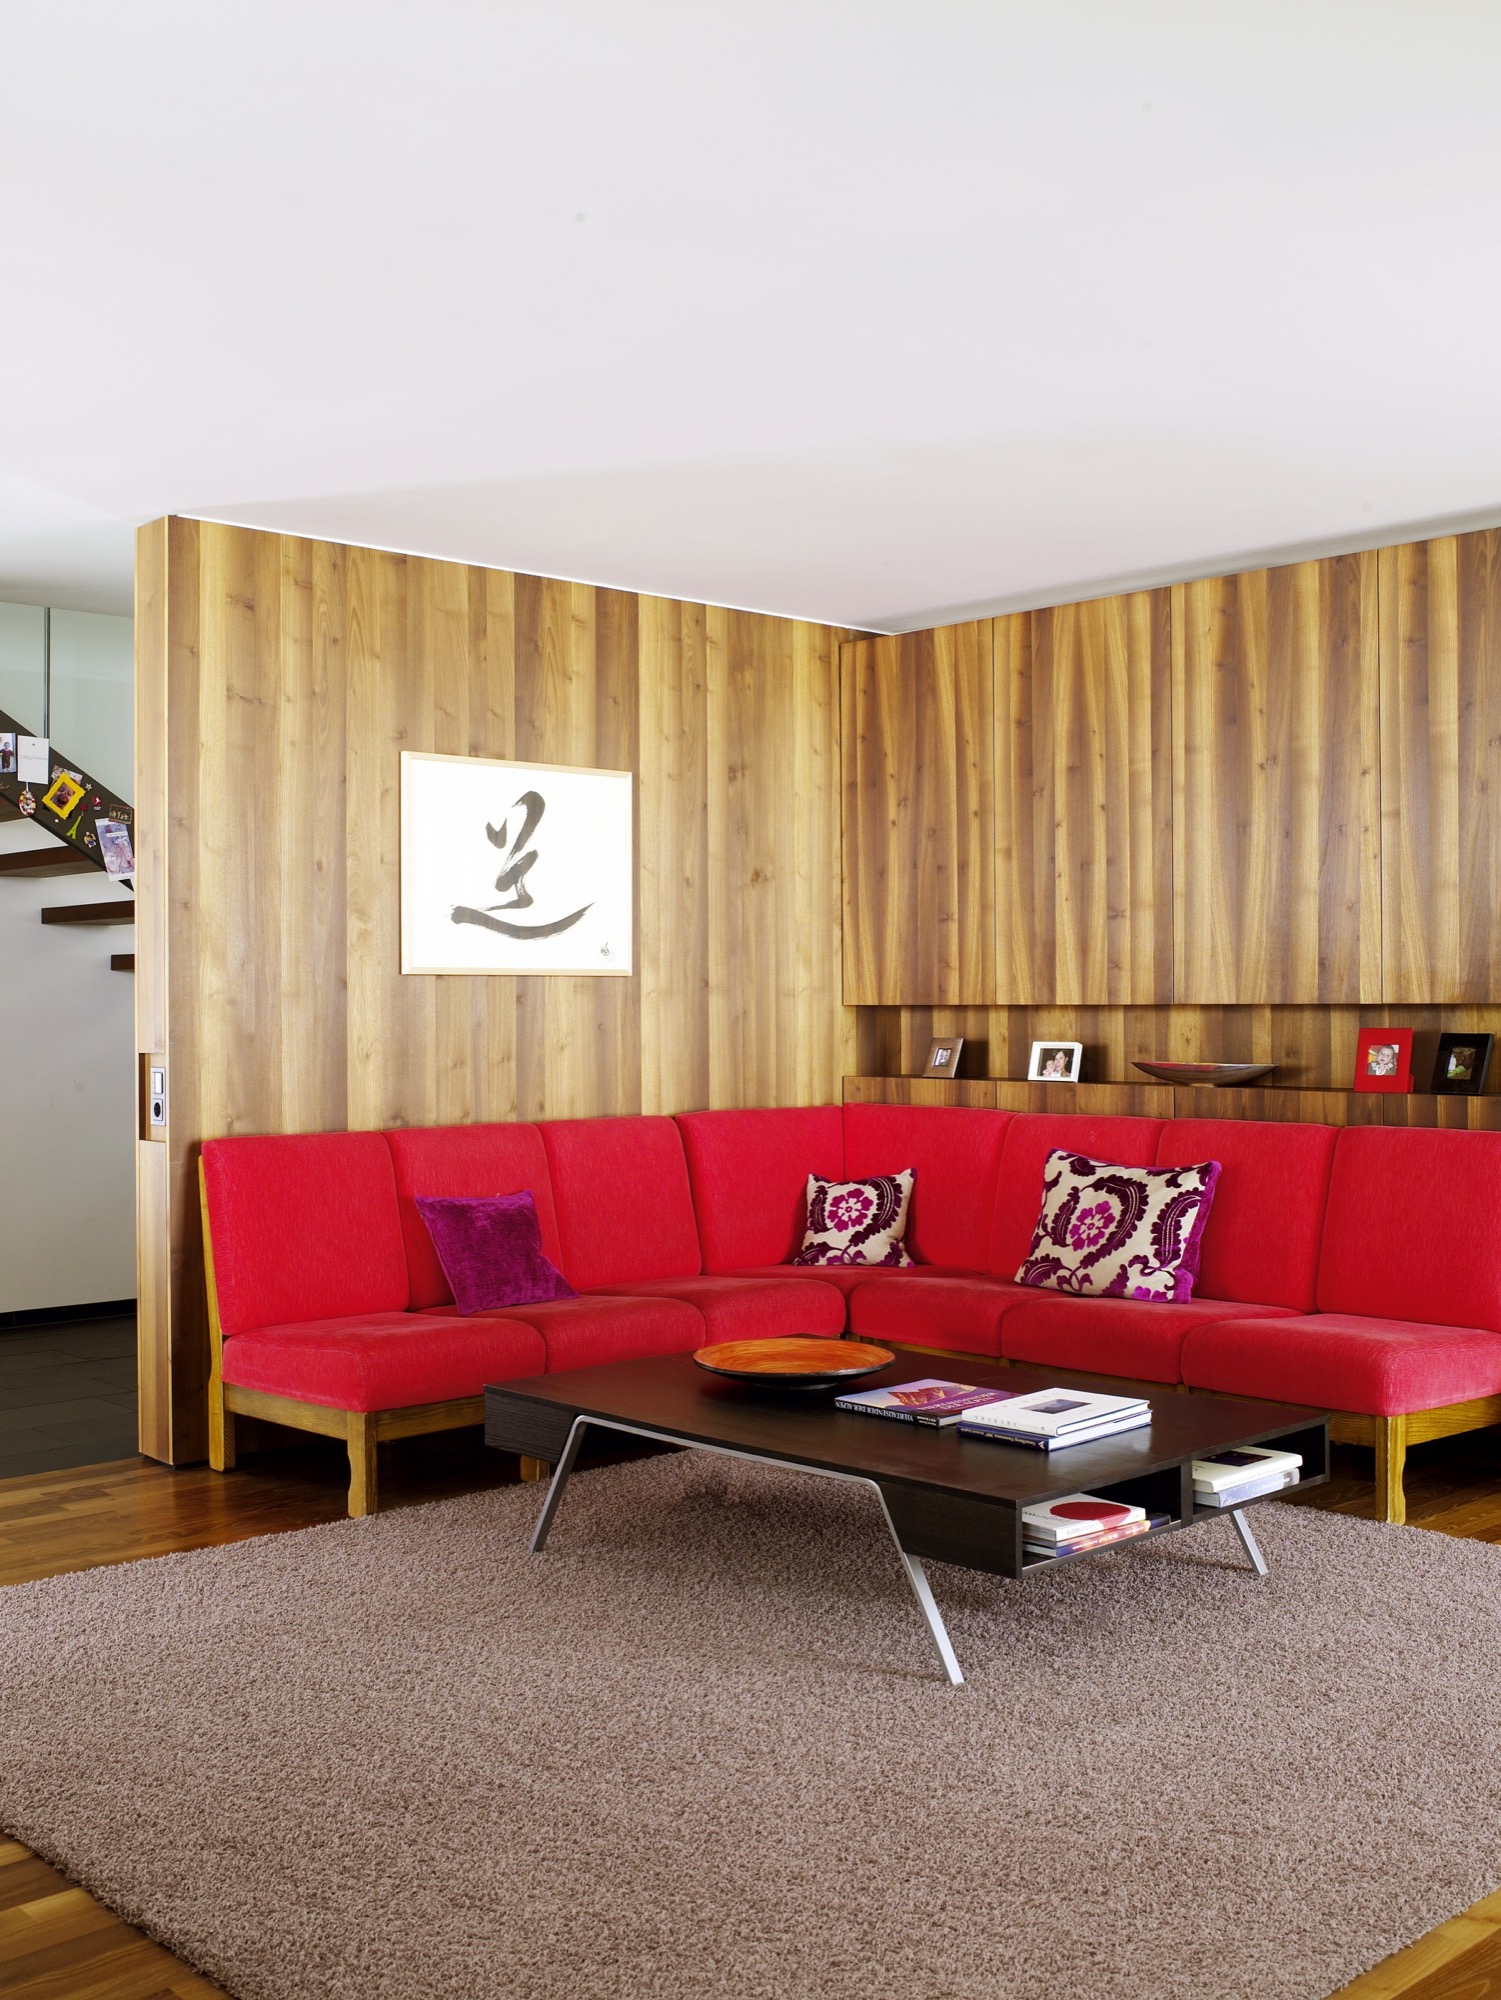 The red sofa in the living room is a 1960s piece originally owned by Strolz’s parents.